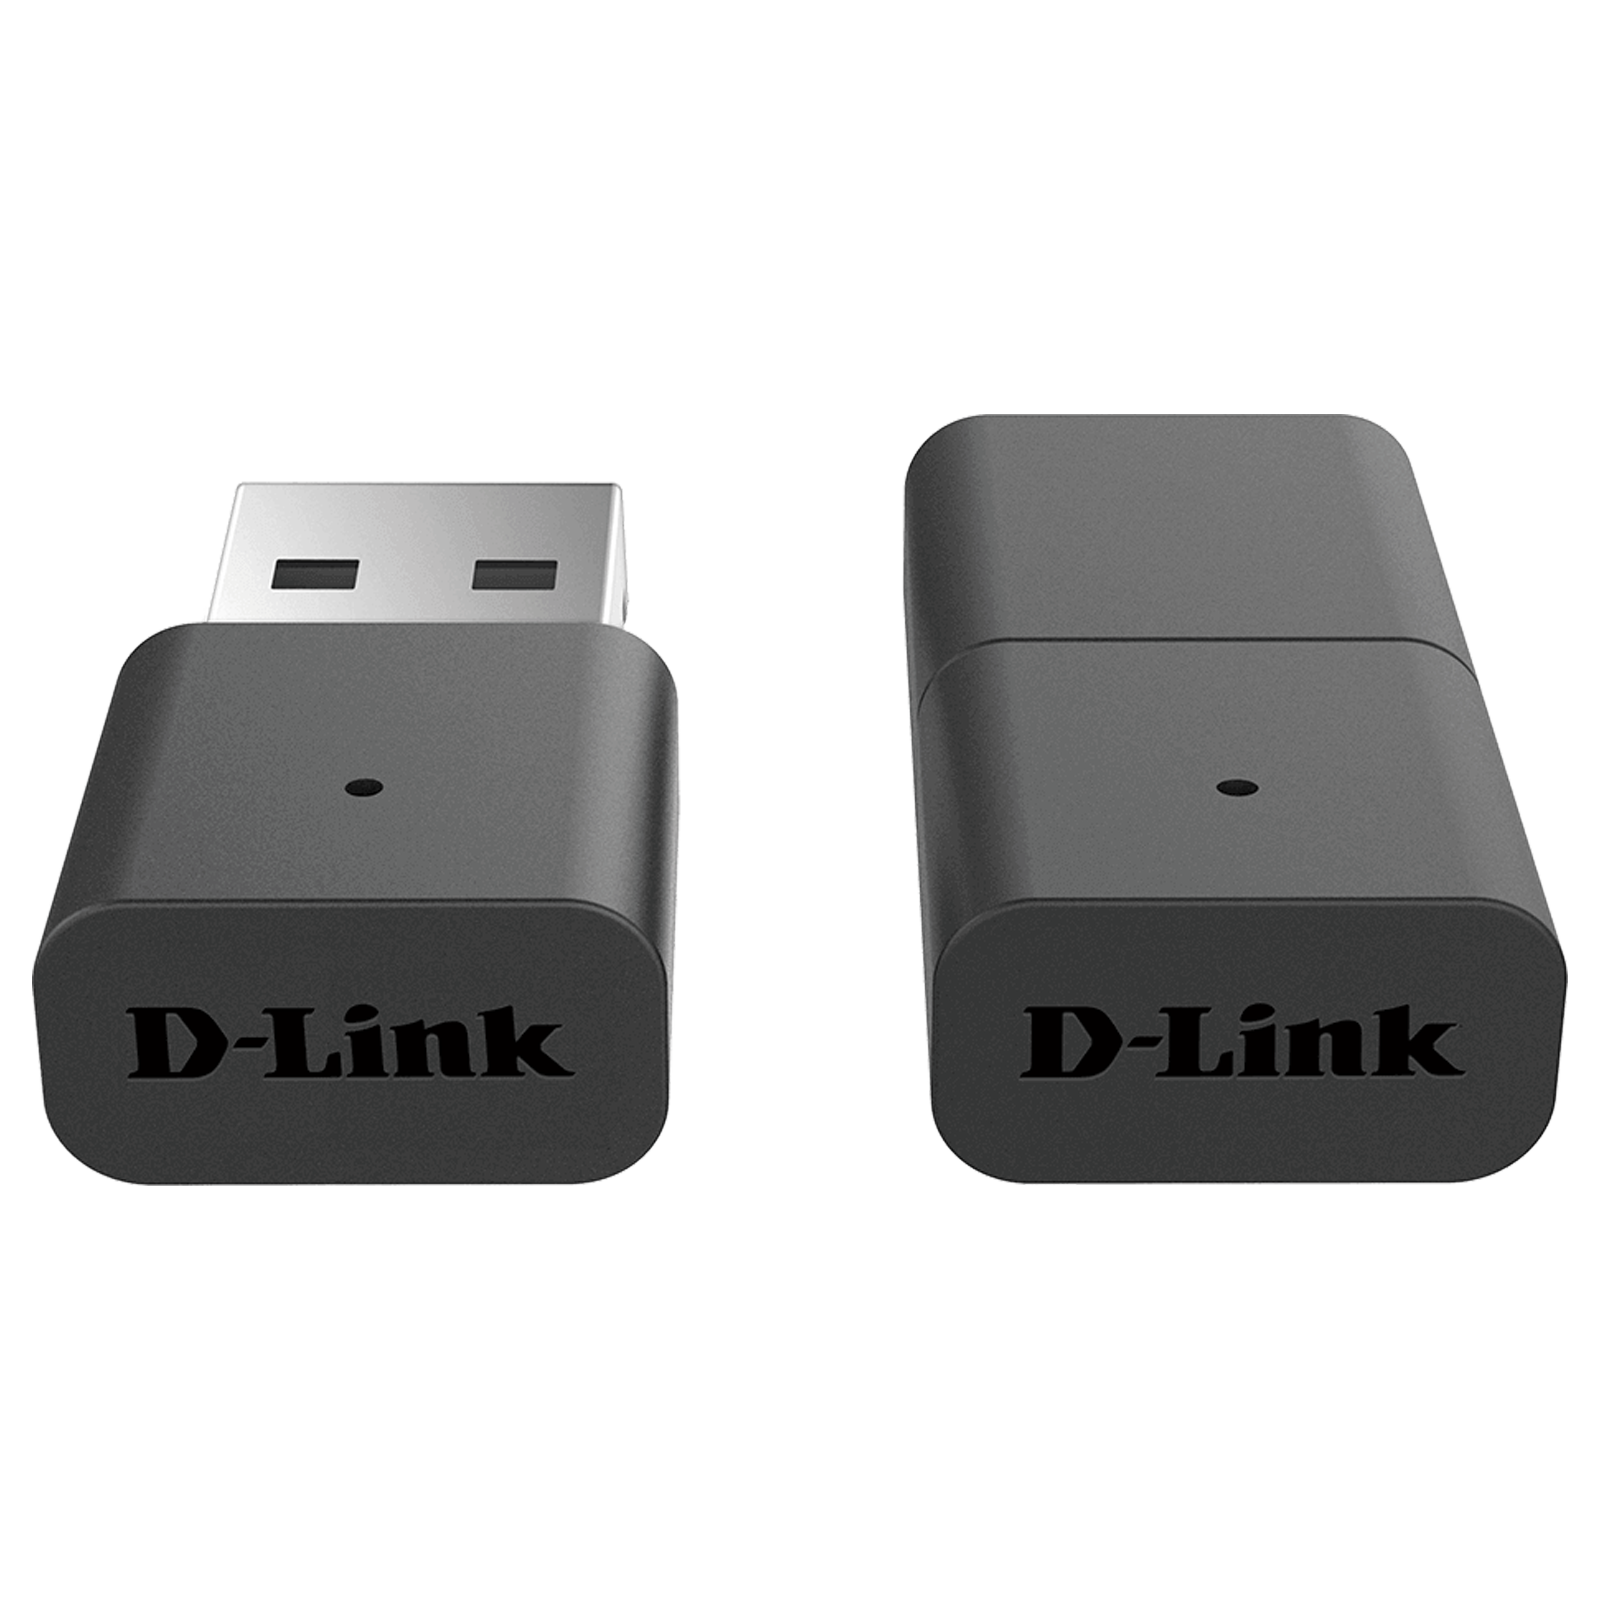 D-Link Wireless N Nano 300 Mbps Download Speed Network Adapter (2 Antennas, MIMO Supported, DWA-131, Black)_3